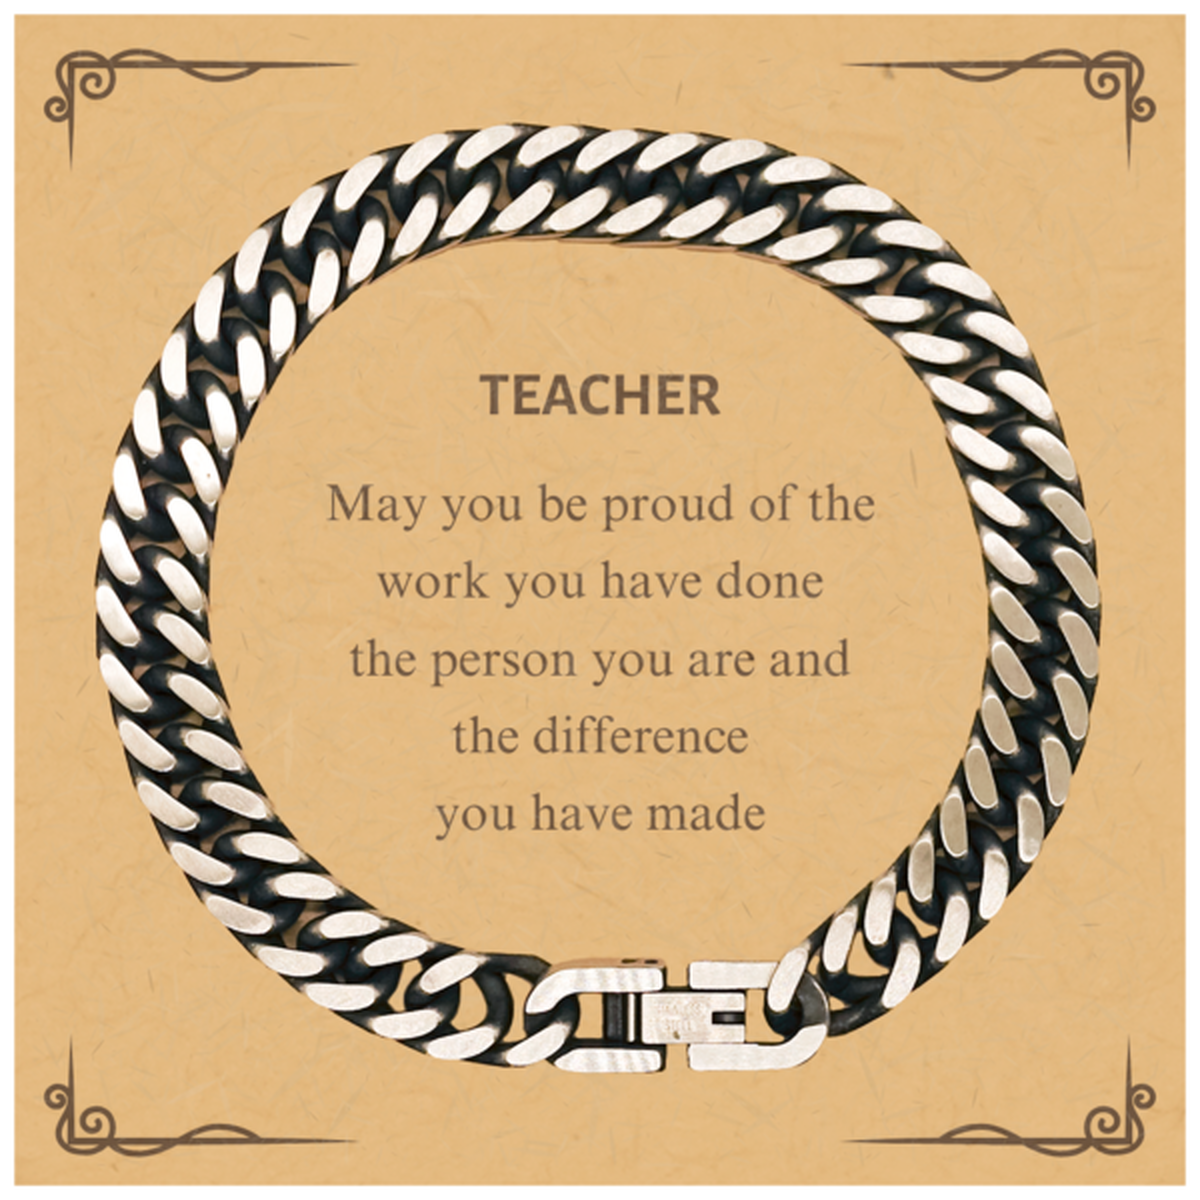 Teacher May you be proud of the work you have done, Retirement Teacher Cuban Link Chain Bracelet for Colleague Appreciation Gifts Amazing for Teacher